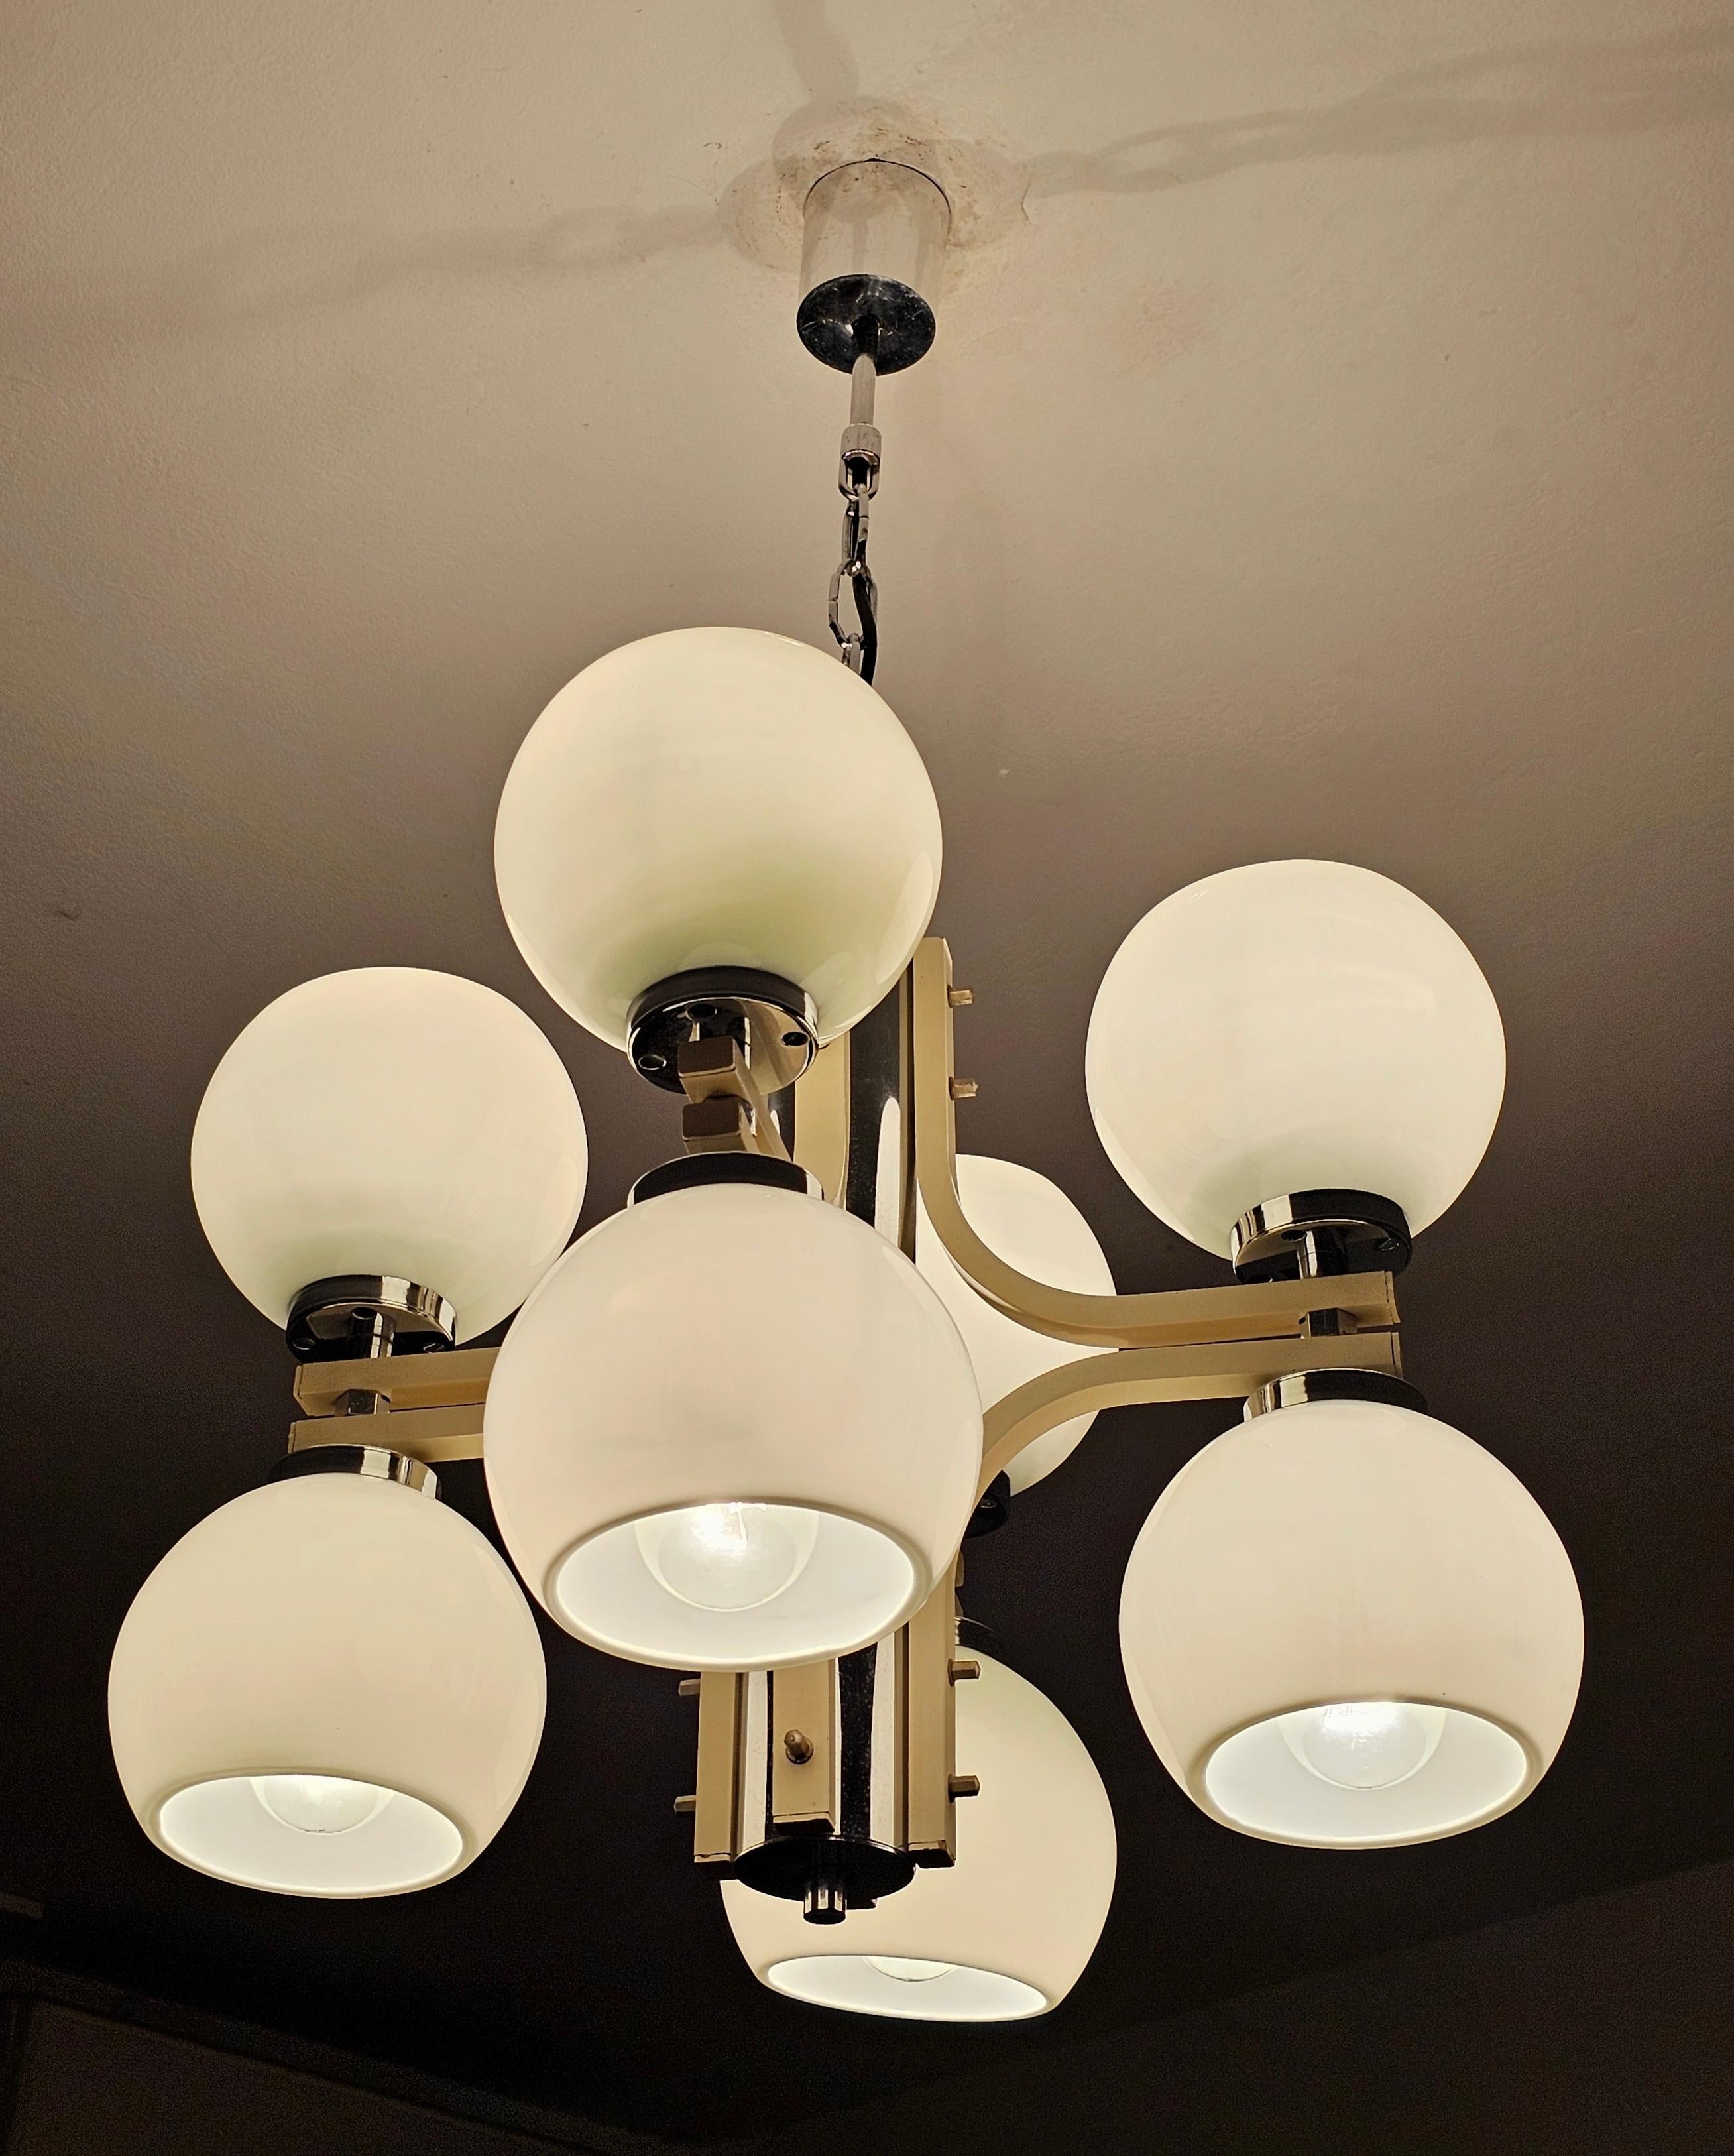 In this listing you will find a stunning Space Age 4-Arm Chandelier with 8 lights placed in white glass balls with open ends. Chandelier features silver and ivory metal fixture. Made in Yugoslavia in 1970s.

Very good vintage condition with small